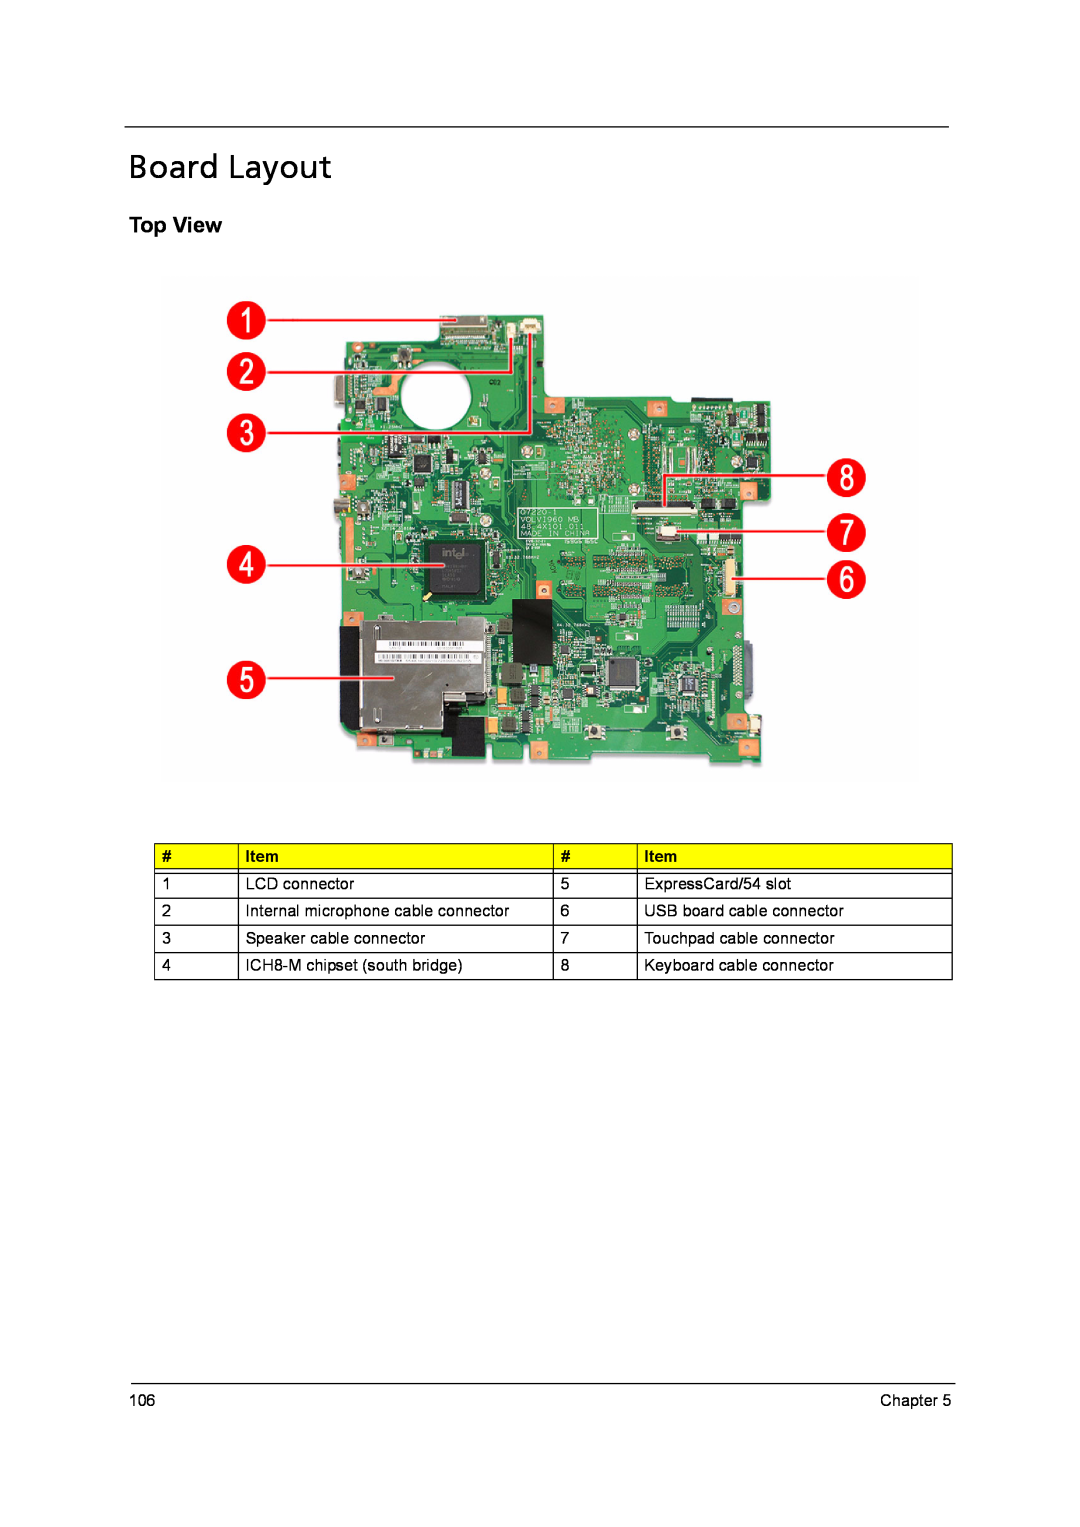 Acer 4315 manual Board Layout, Top View, Chapter 